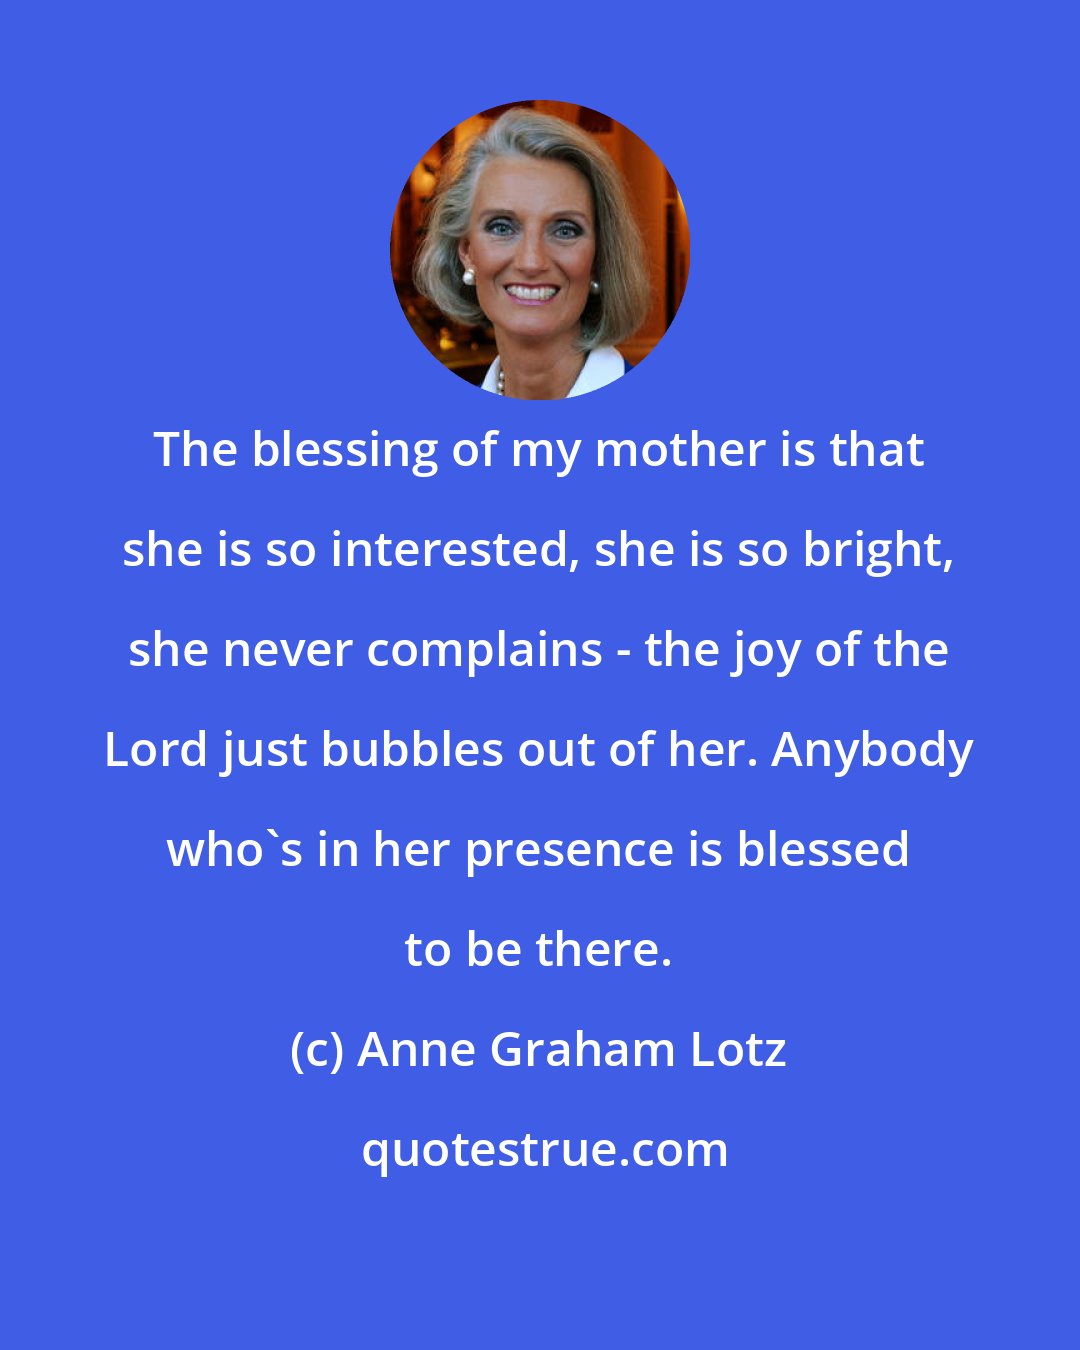 Anne Graham Lotz: The blessing of my mother is that she is so interested, she is so bright, she never complains - the joy of the Lord just bubbles out of her. Anybody who's in her presence is blessed to be there.